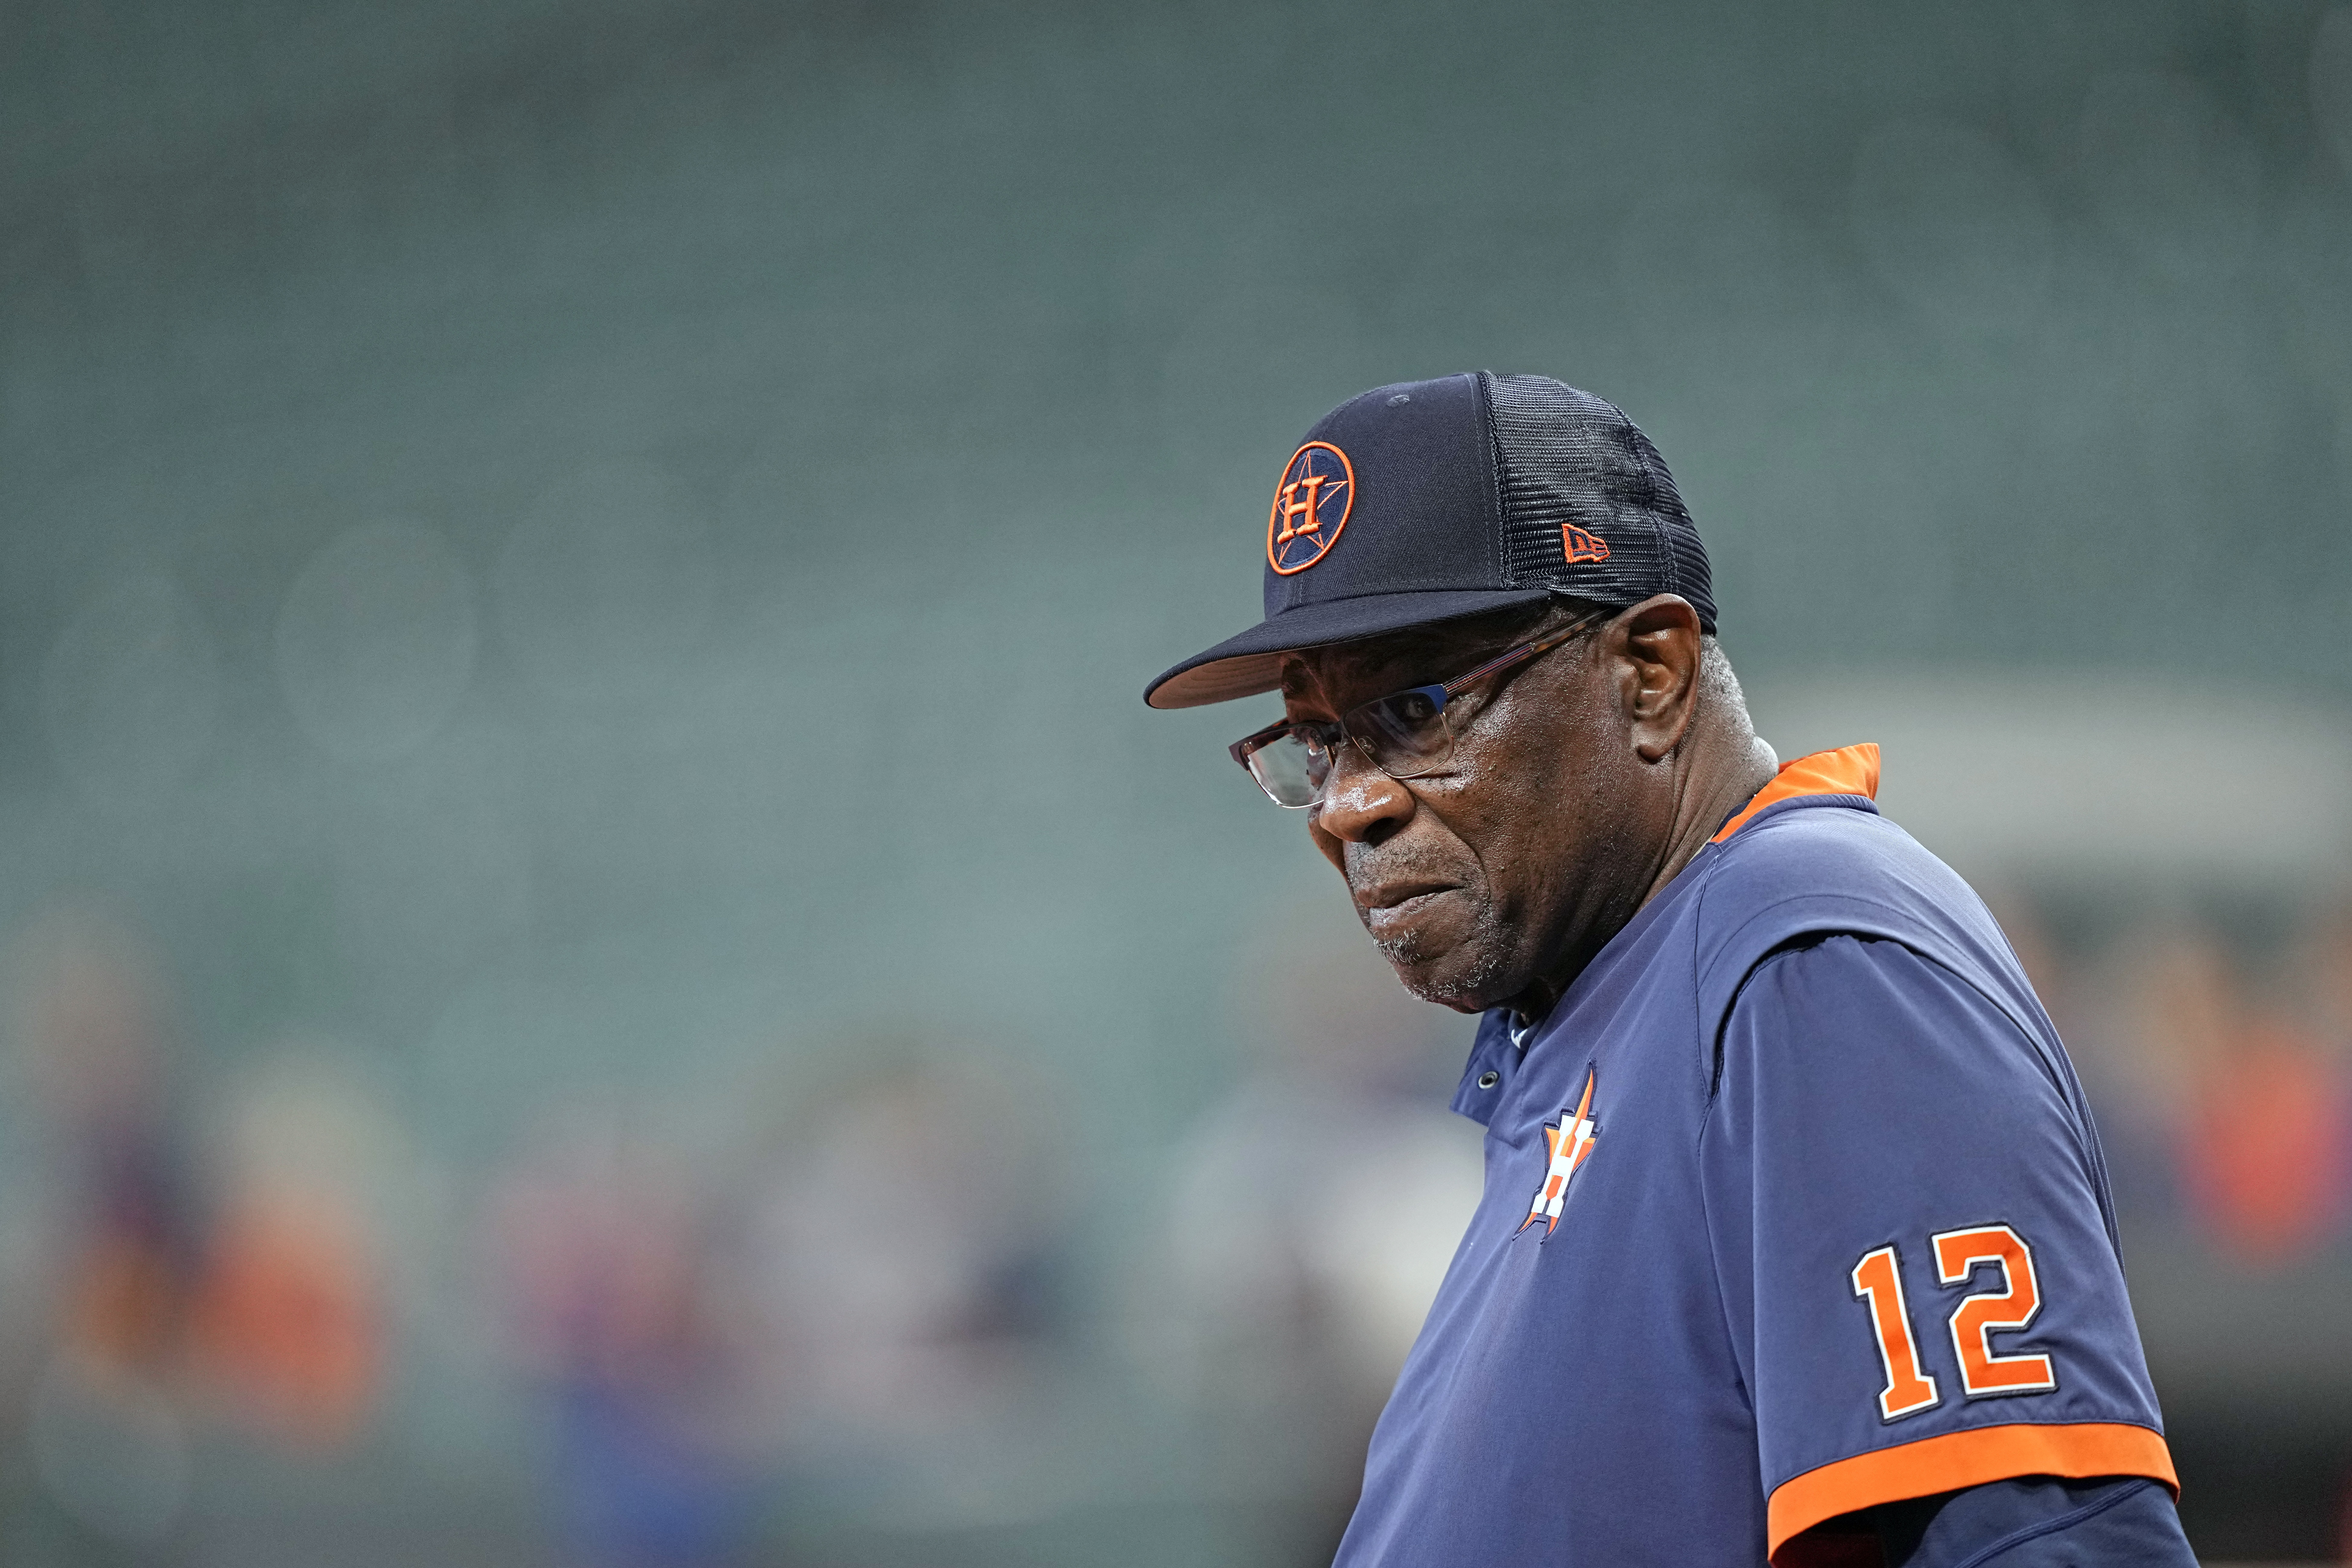 Astros Manager Dusty Baker gets COVID! His Mask and Gloves could NOT STOP  IT! 